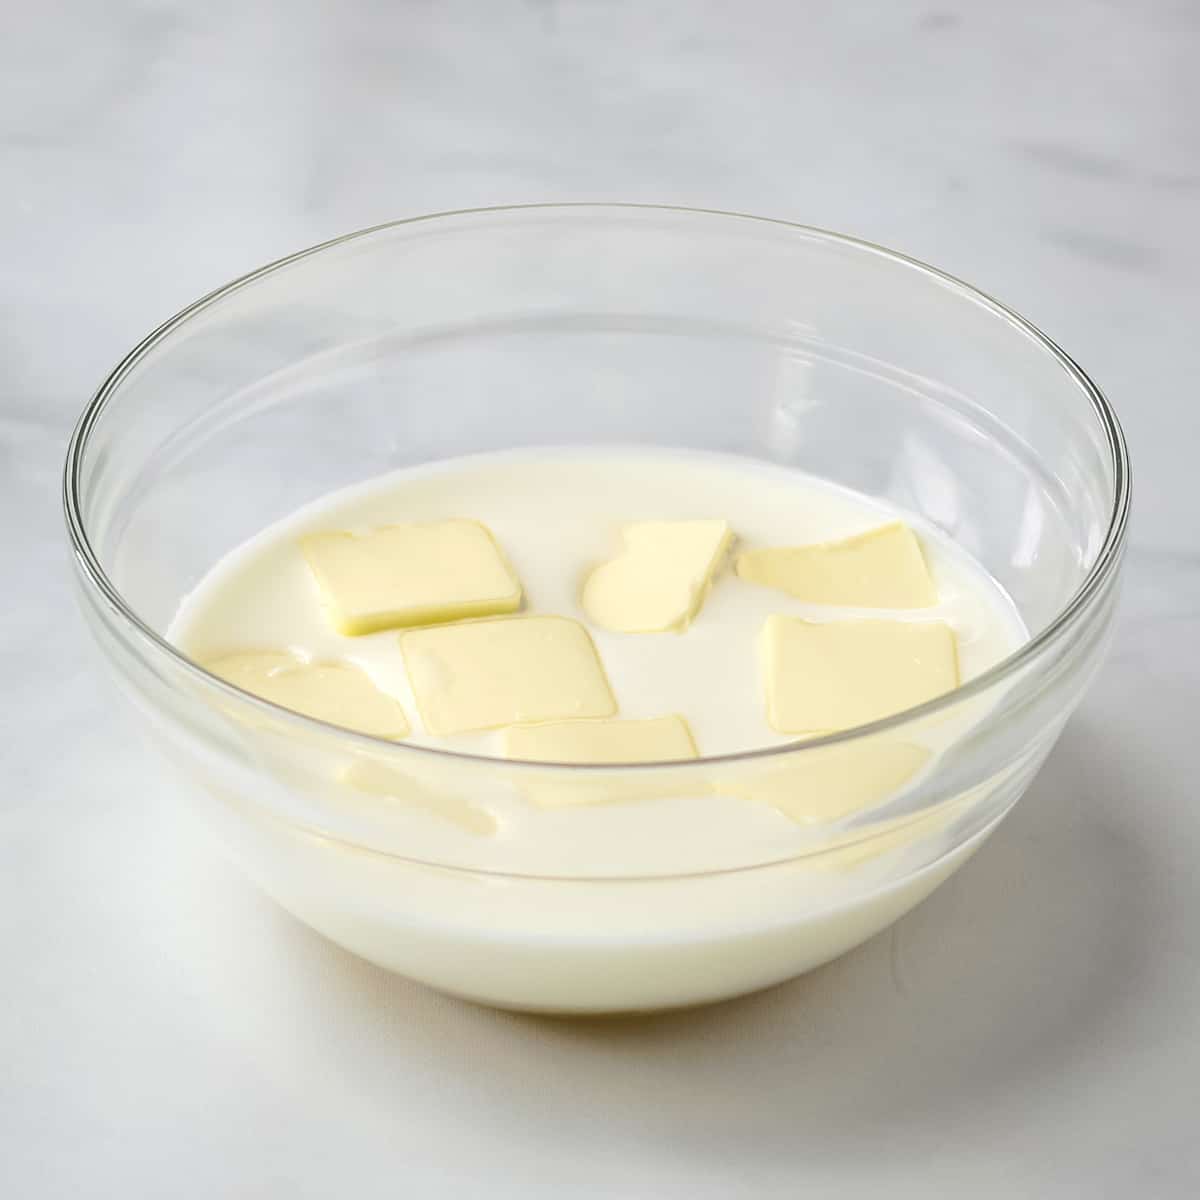 Buttermilk, sugar, and butter pads in a clear glass bowl.